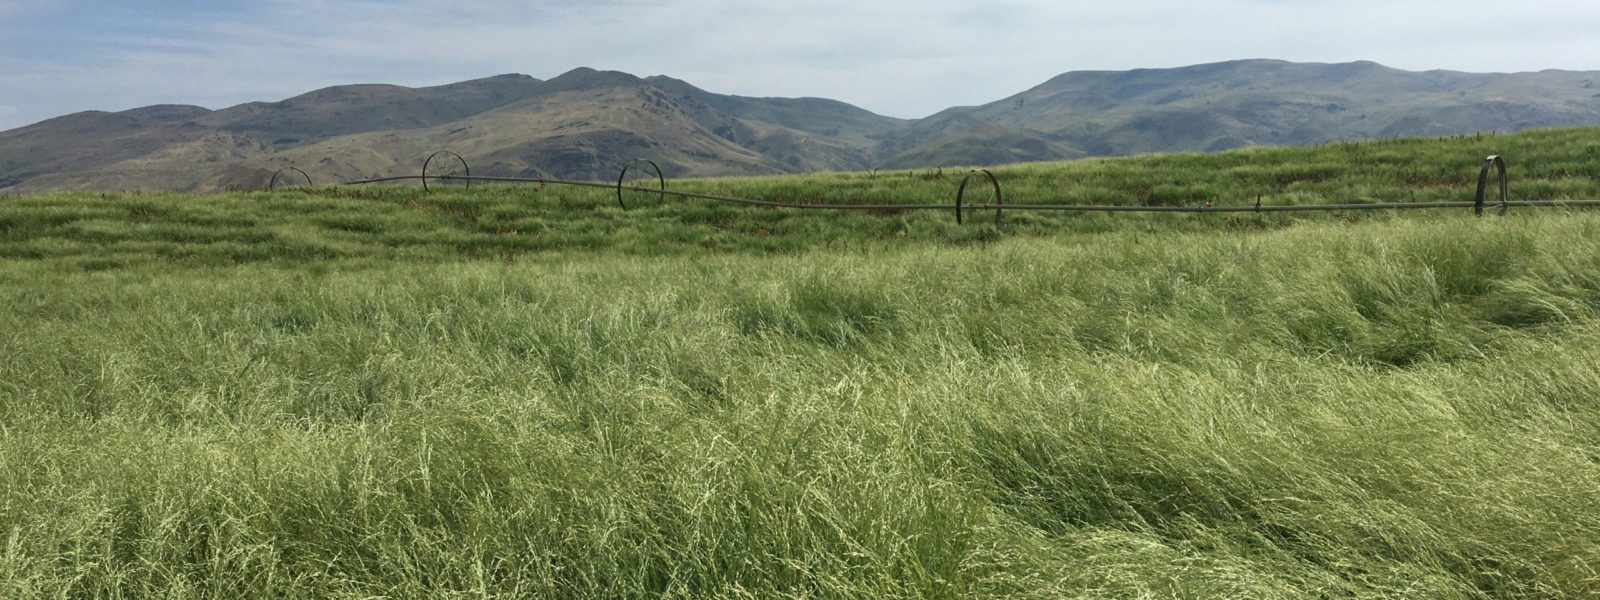 A field of teff grain with mountains in the background